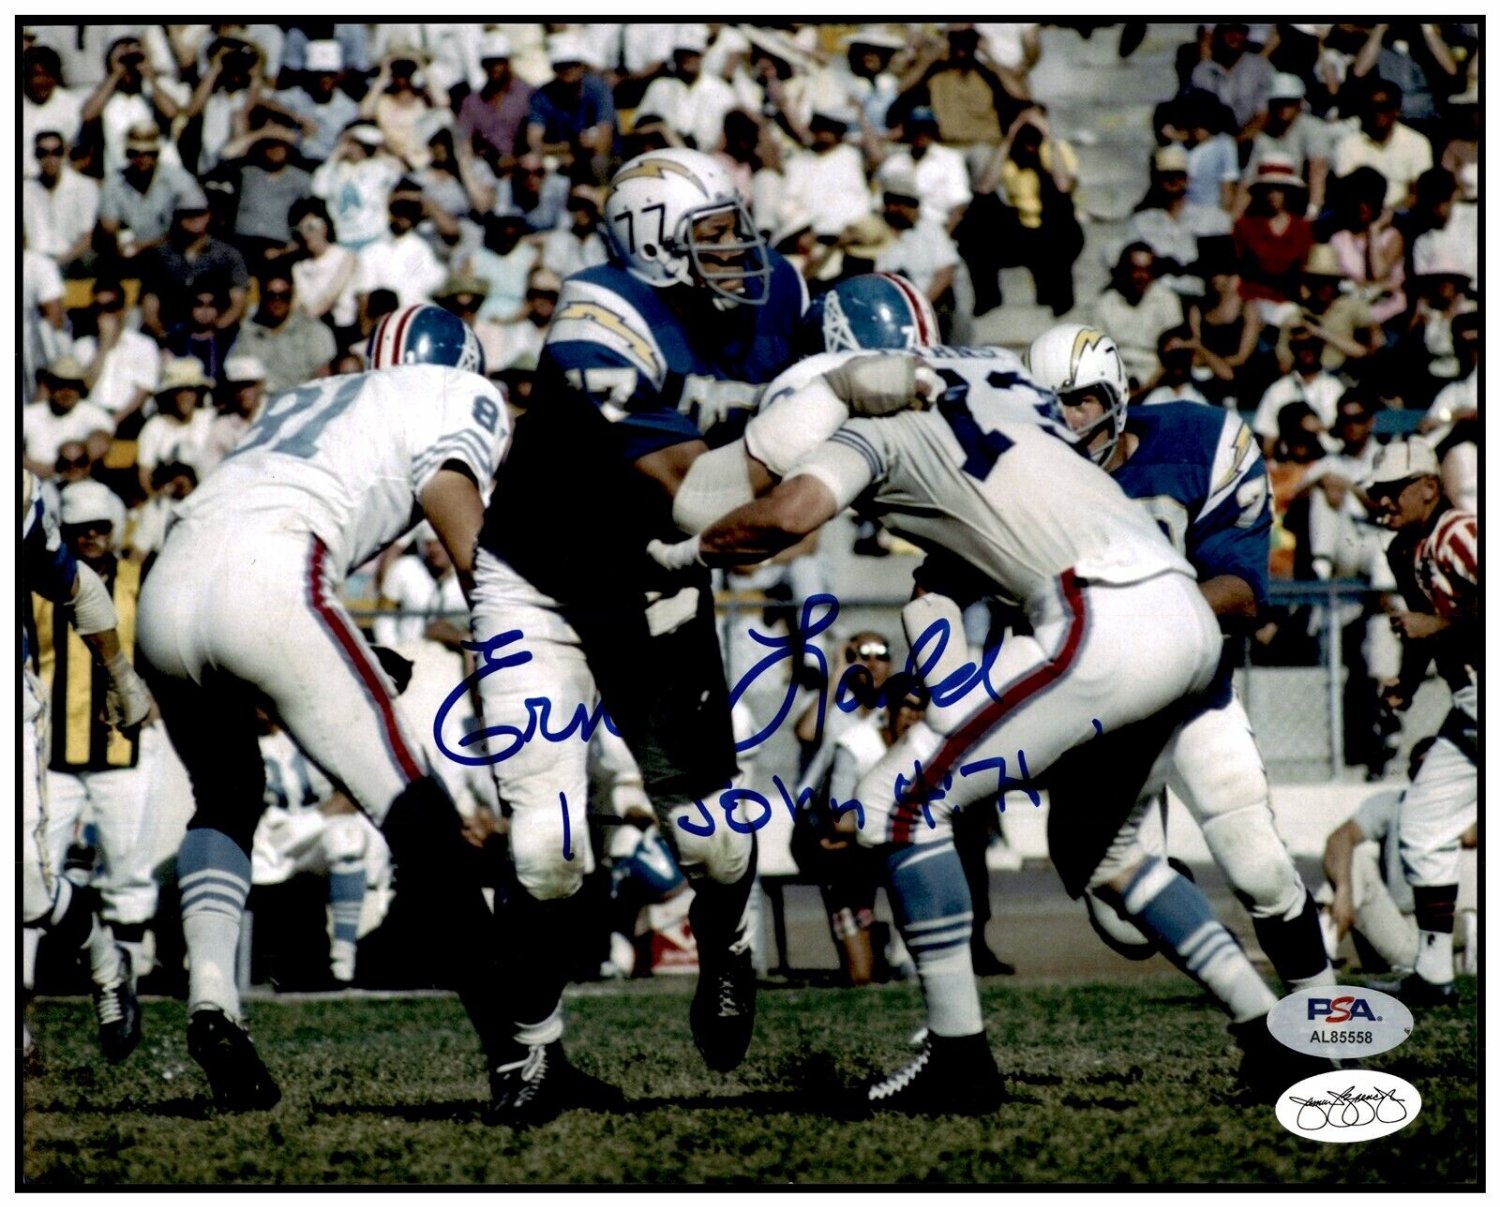 Ernie Ladd Autographed Signed The Big Cat Photo 8X10 Afl Chargers PSA/DNA